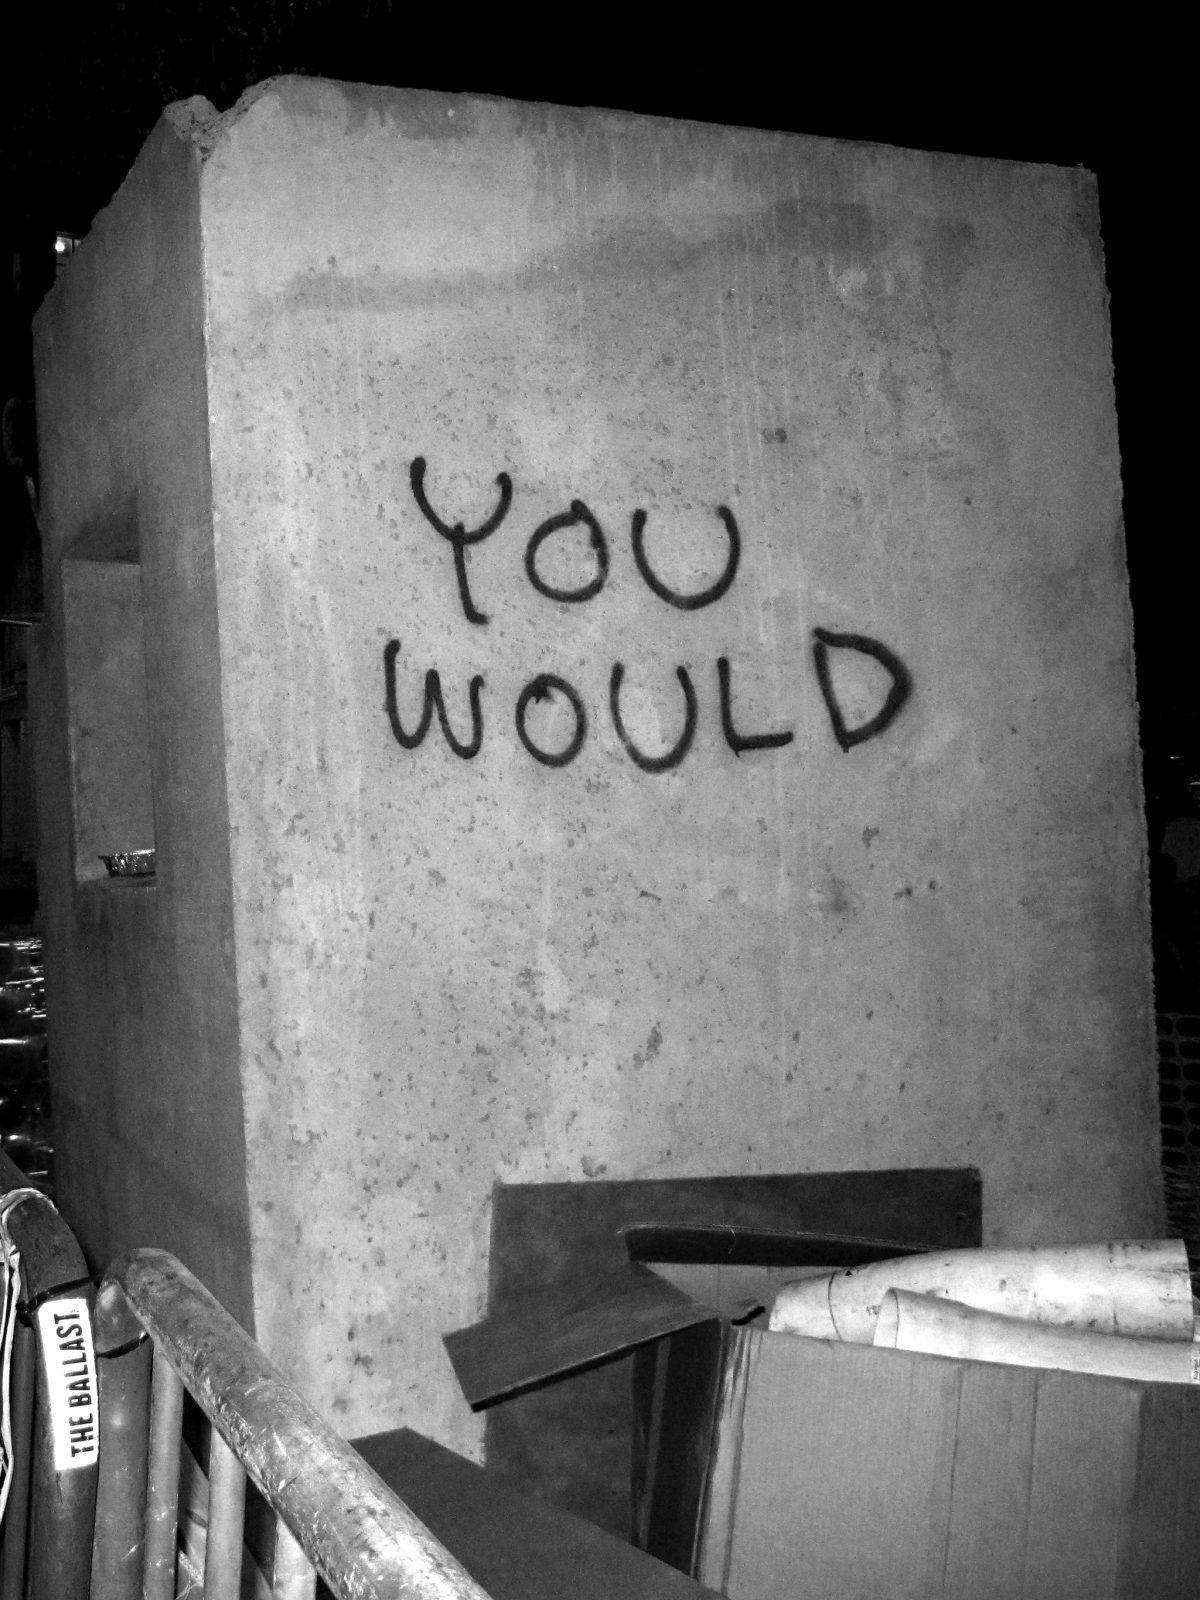 You would – Carl June